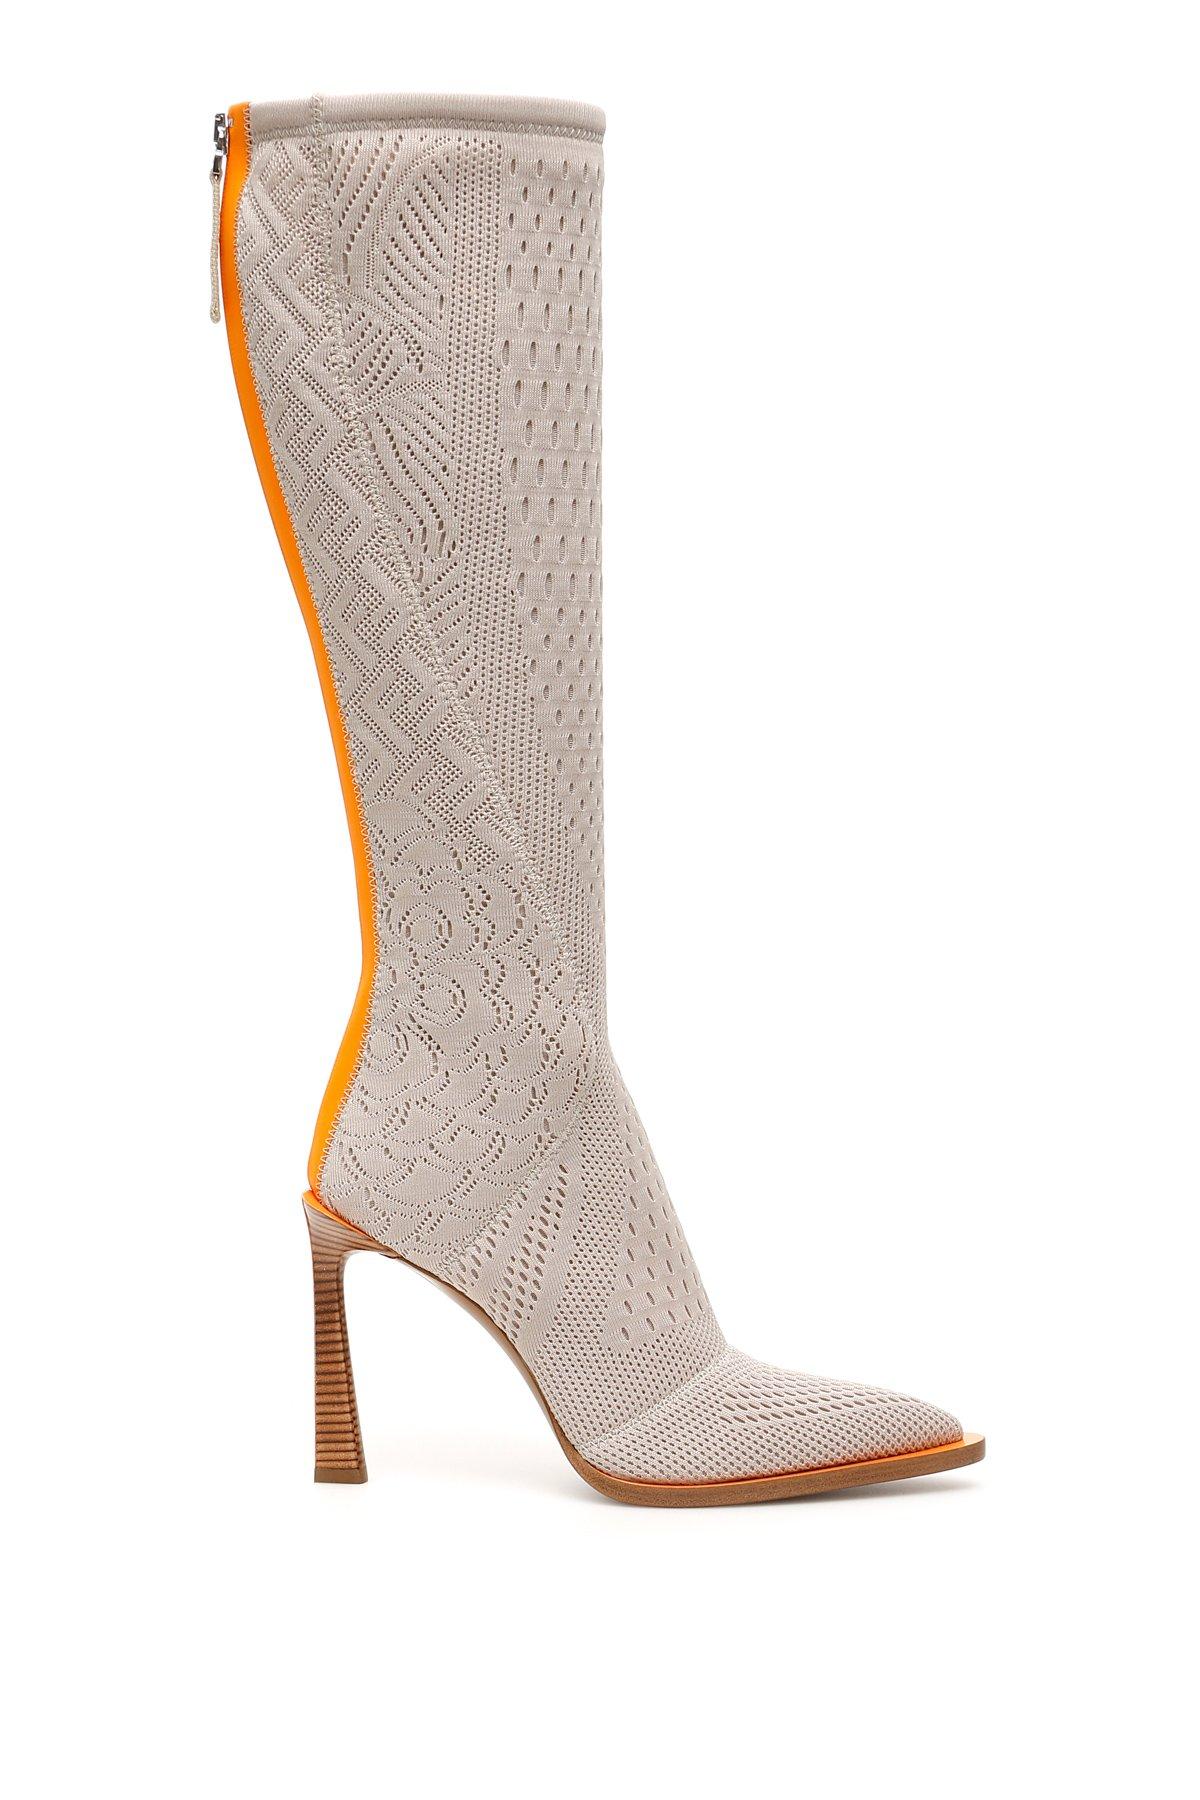 Fendi Synthetic Ff Jacquard Knit Boots - Save 40% - Lyst